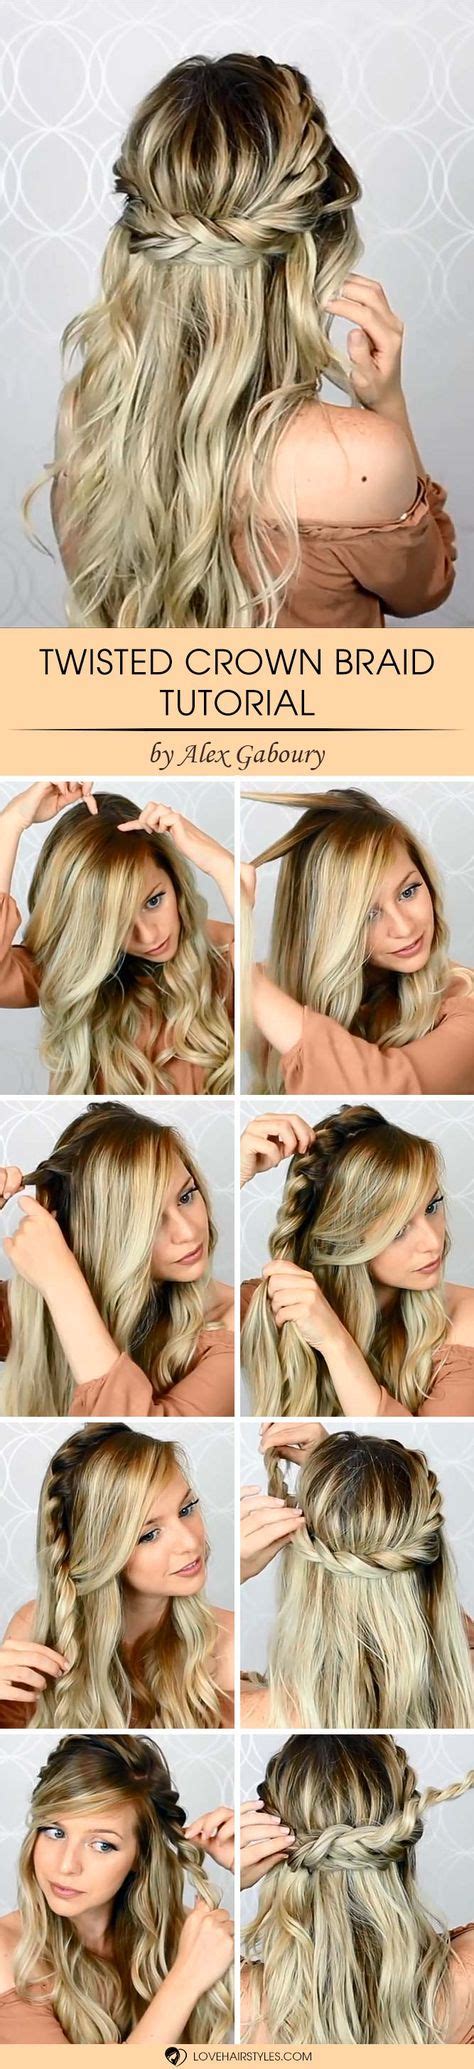 You Can Master This Twisted Crown Braid Tutorial In Less Than 10